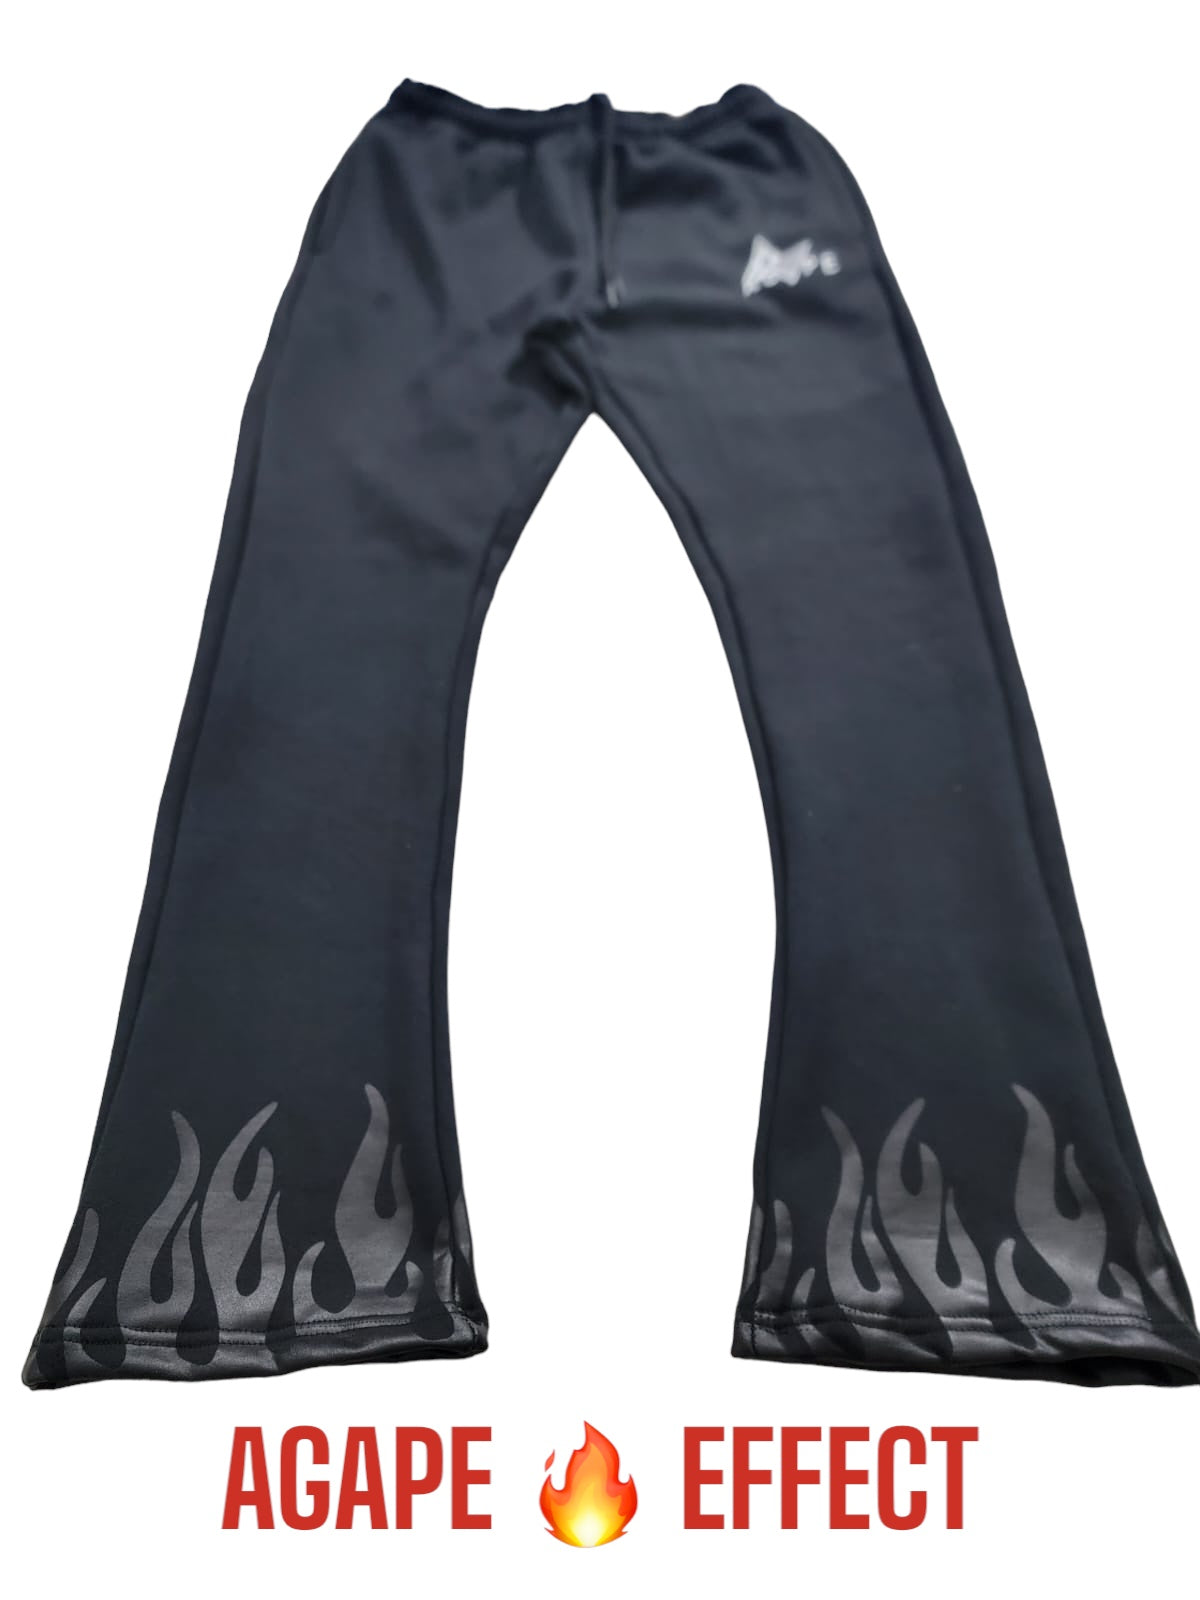 FLAME EFFECT STACK JOGGERS